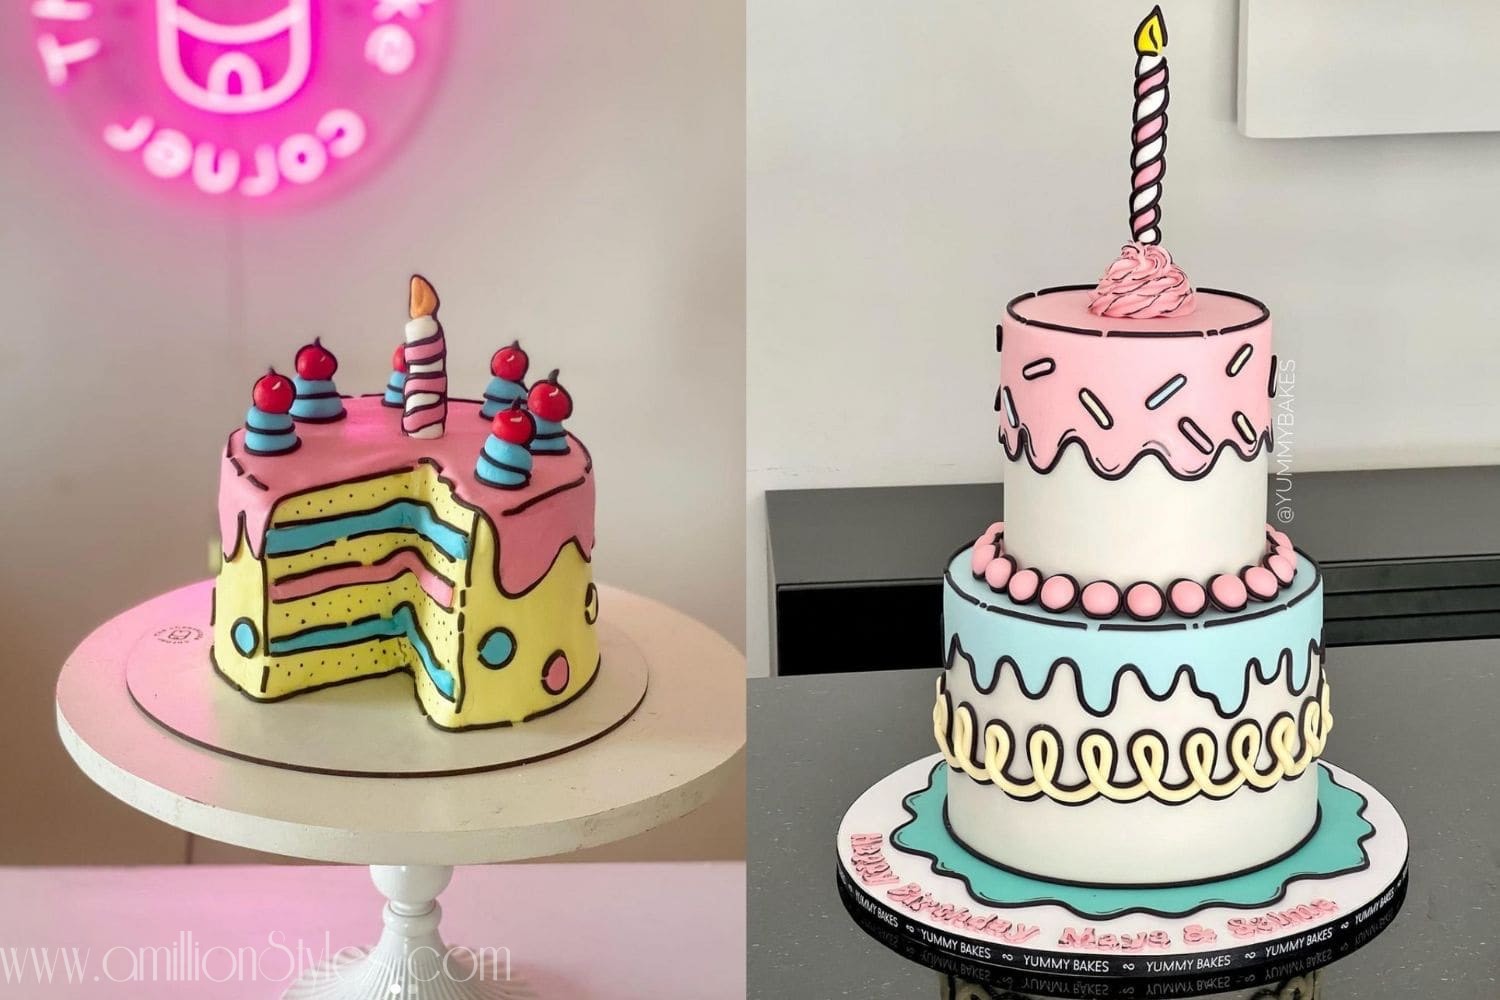 Popular Cartoon Cake Trends: Exploring Their Fame and Appeal – A ...